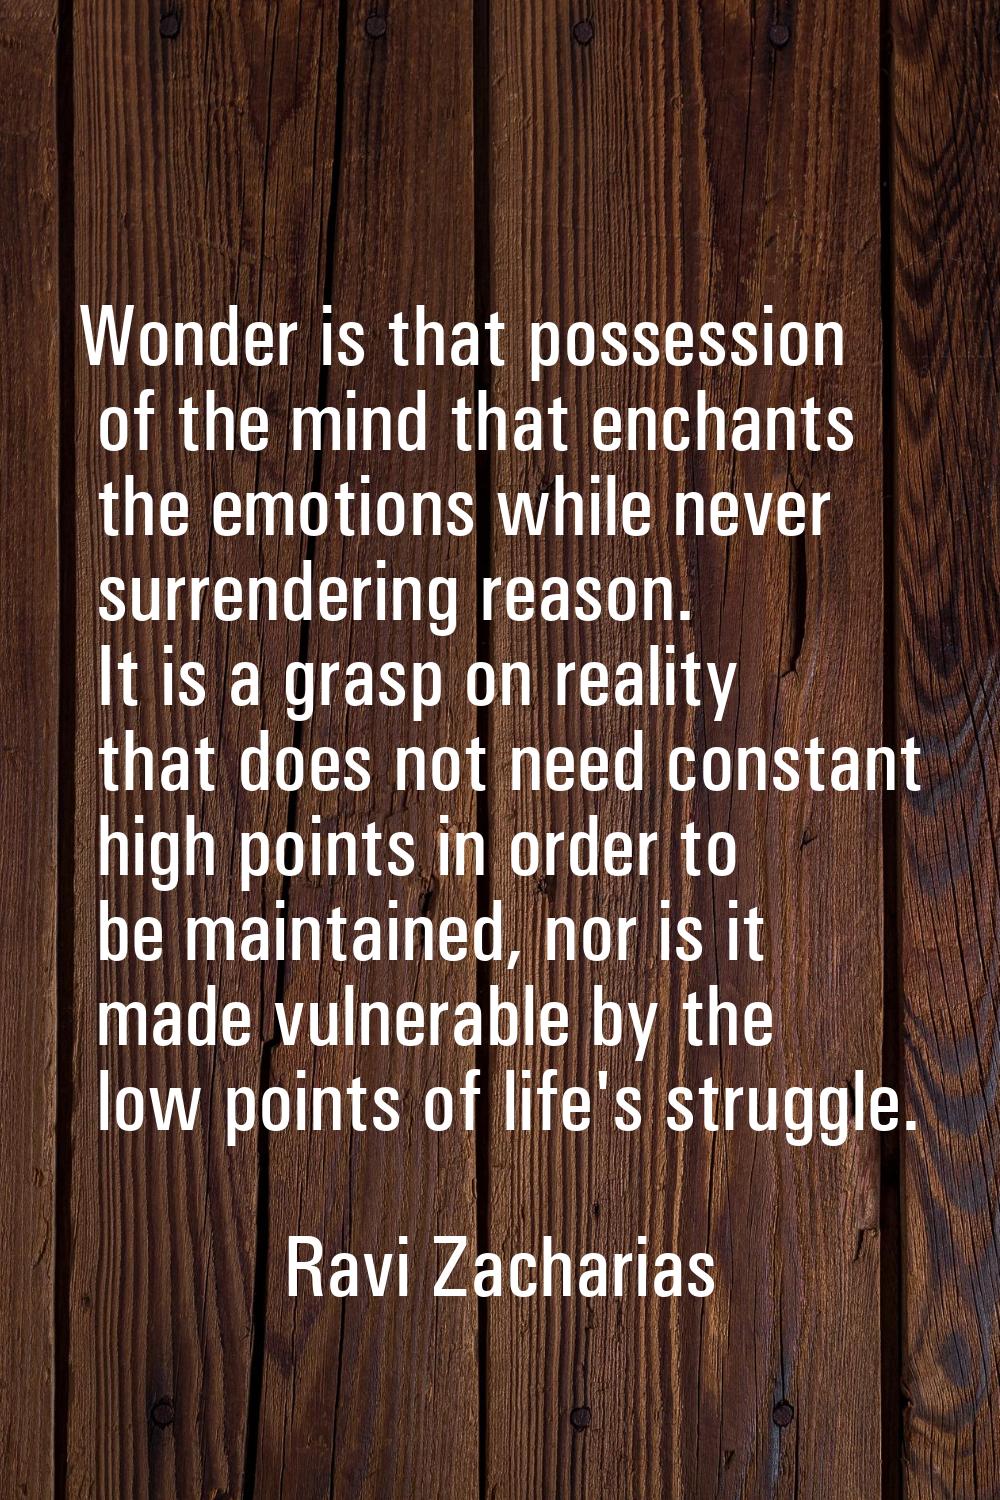 Wonder is that possession of the mind that enchants the emotions while never surrendering reason. I